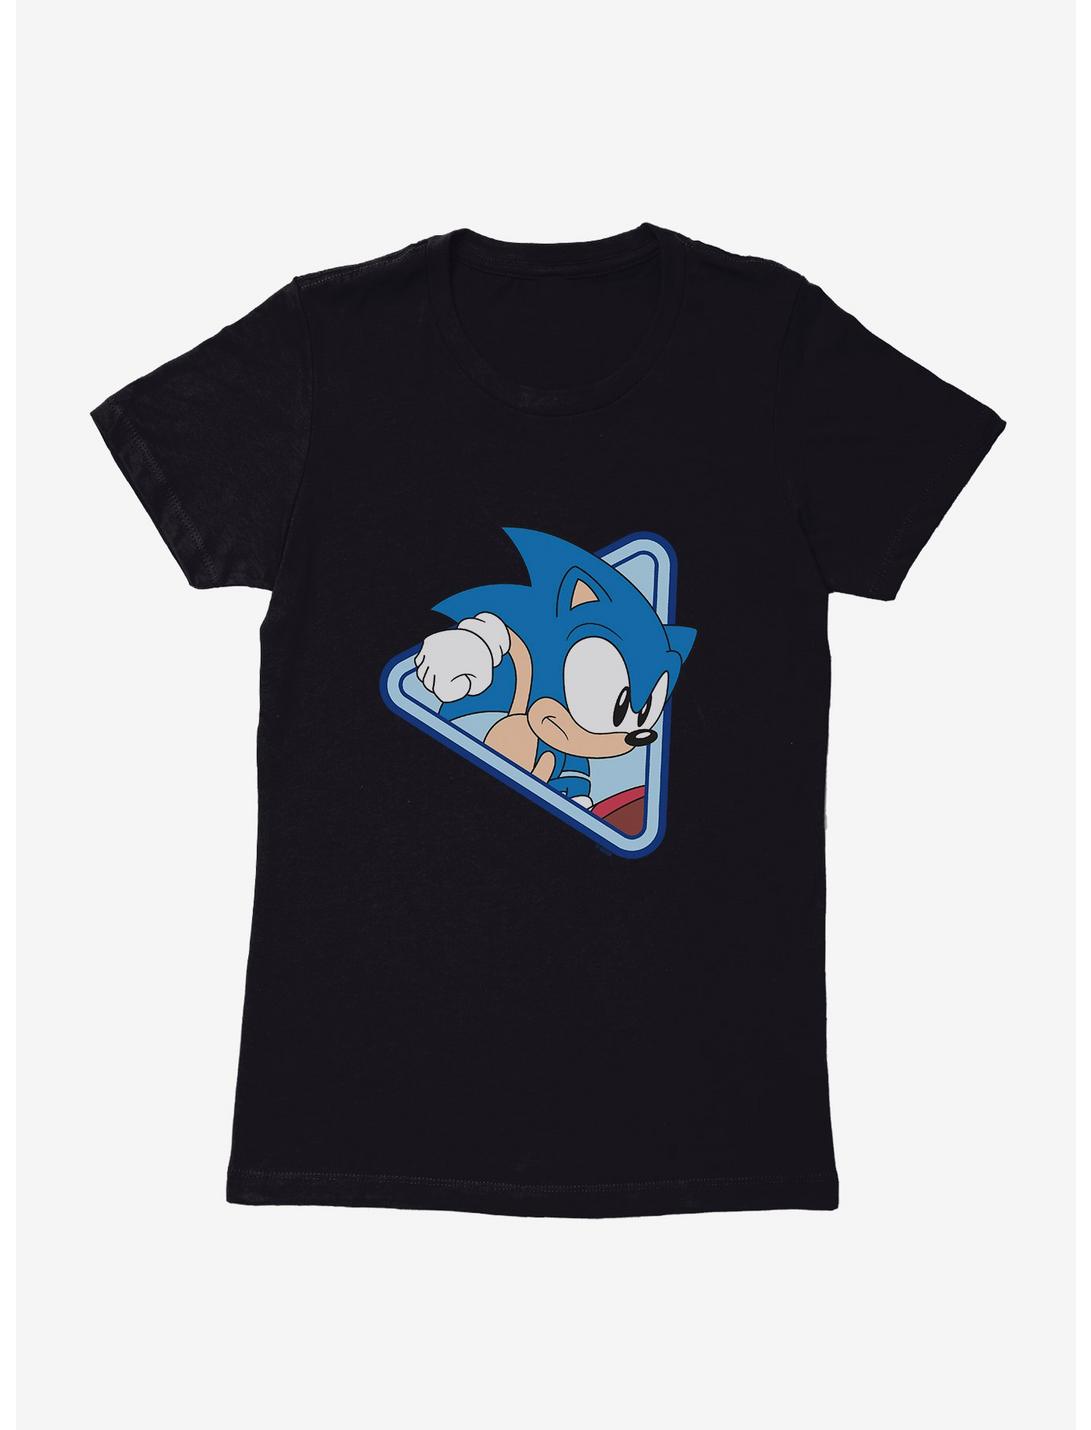 Sonic The Hedgehog In Action Womens T-Shirt, BLACK, hi-res